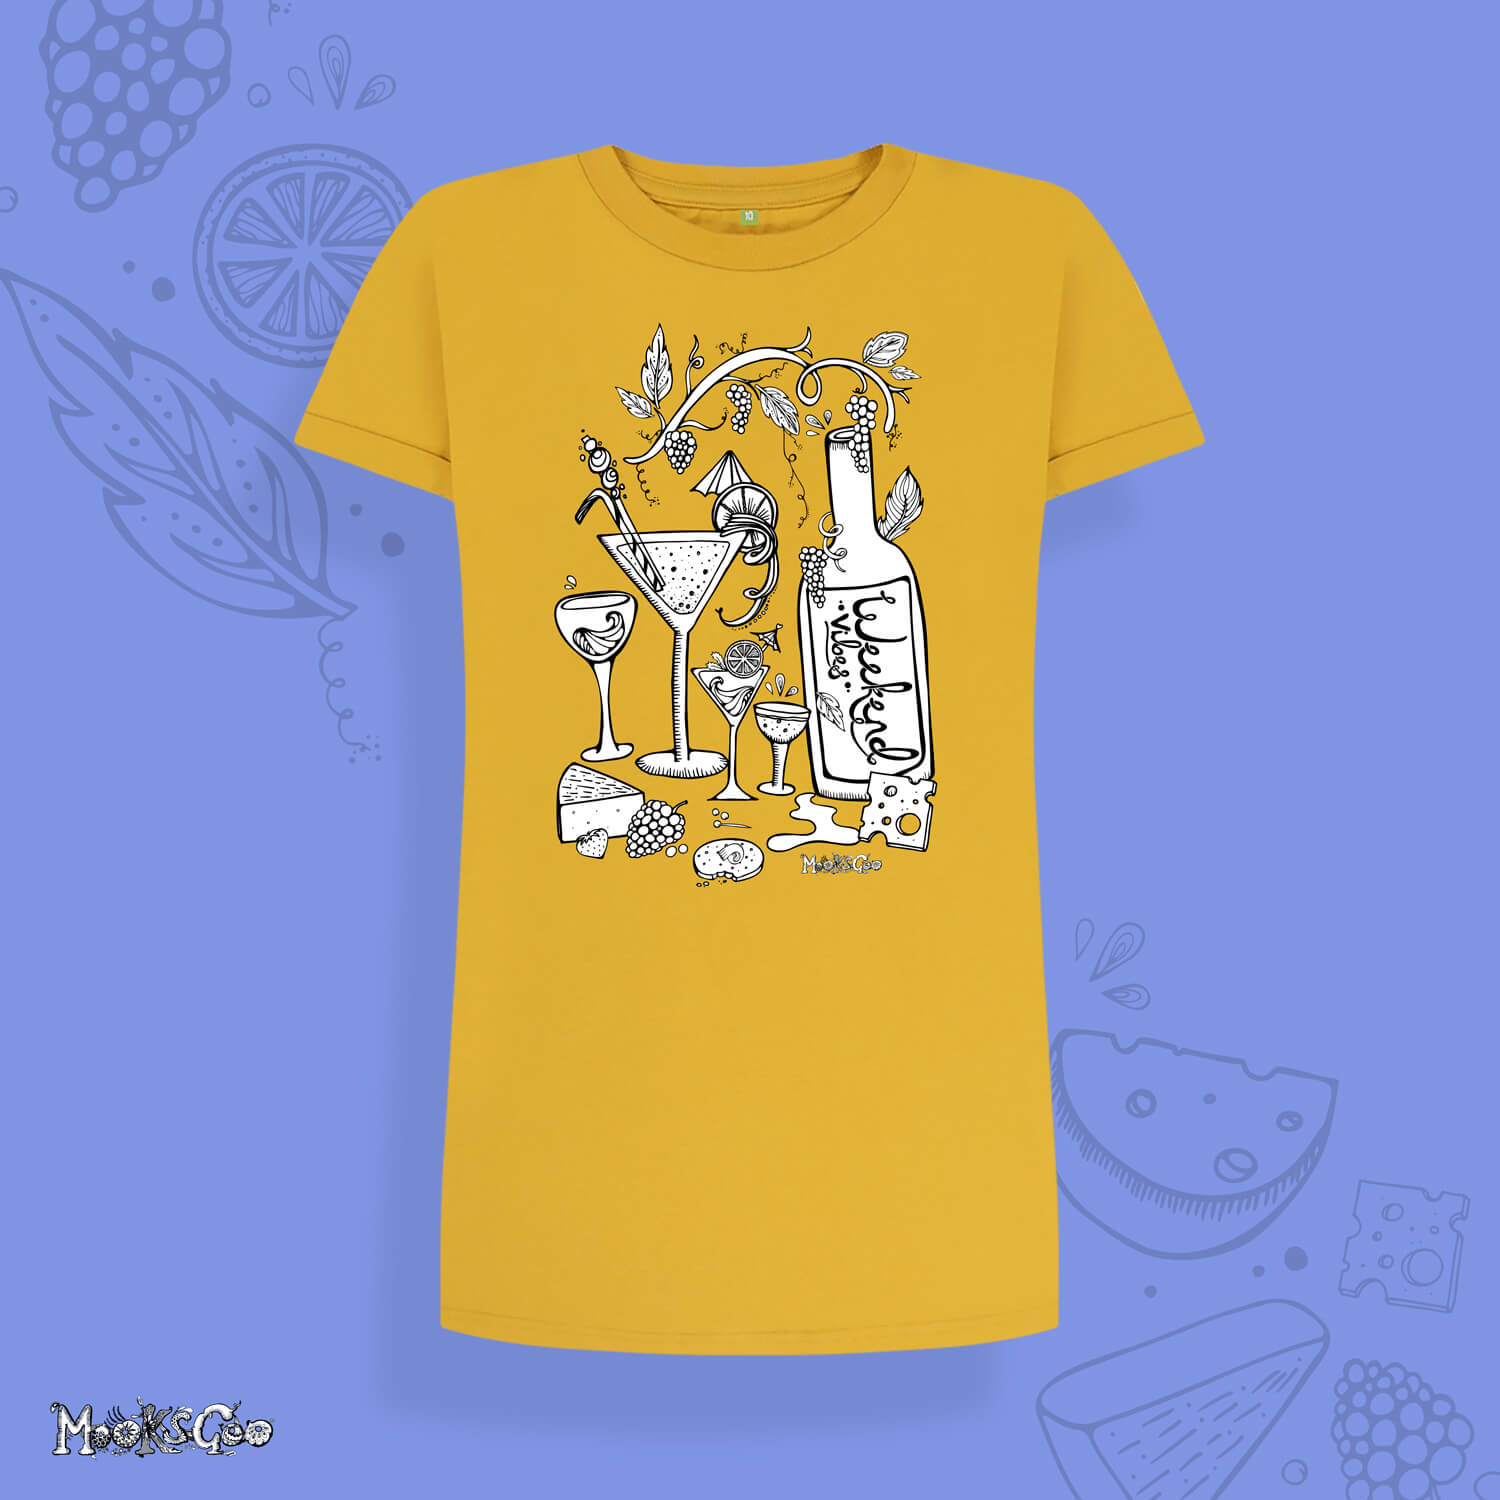 Mustard oversized t-shirt dress with bold black and white picture of cheese and wine themed illustration on a long, oversized and relaxed t-shirt dress. It shows a bottle of wine, cocktails, brie cheese, grapes and biscuits - great for a girly night in clothing. Designed by MooksGoo 